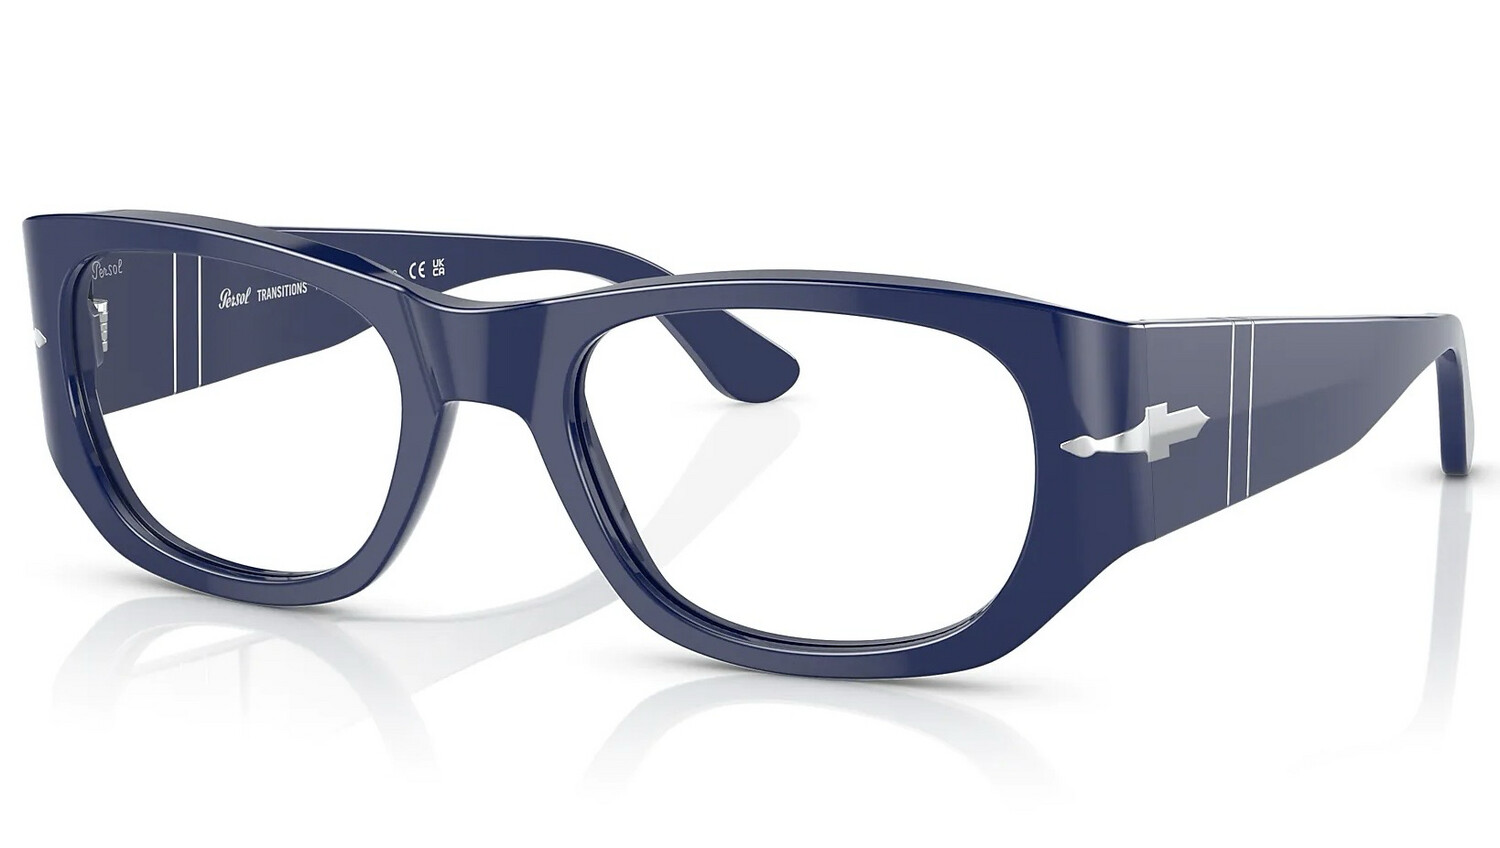 PERSOL 3307S